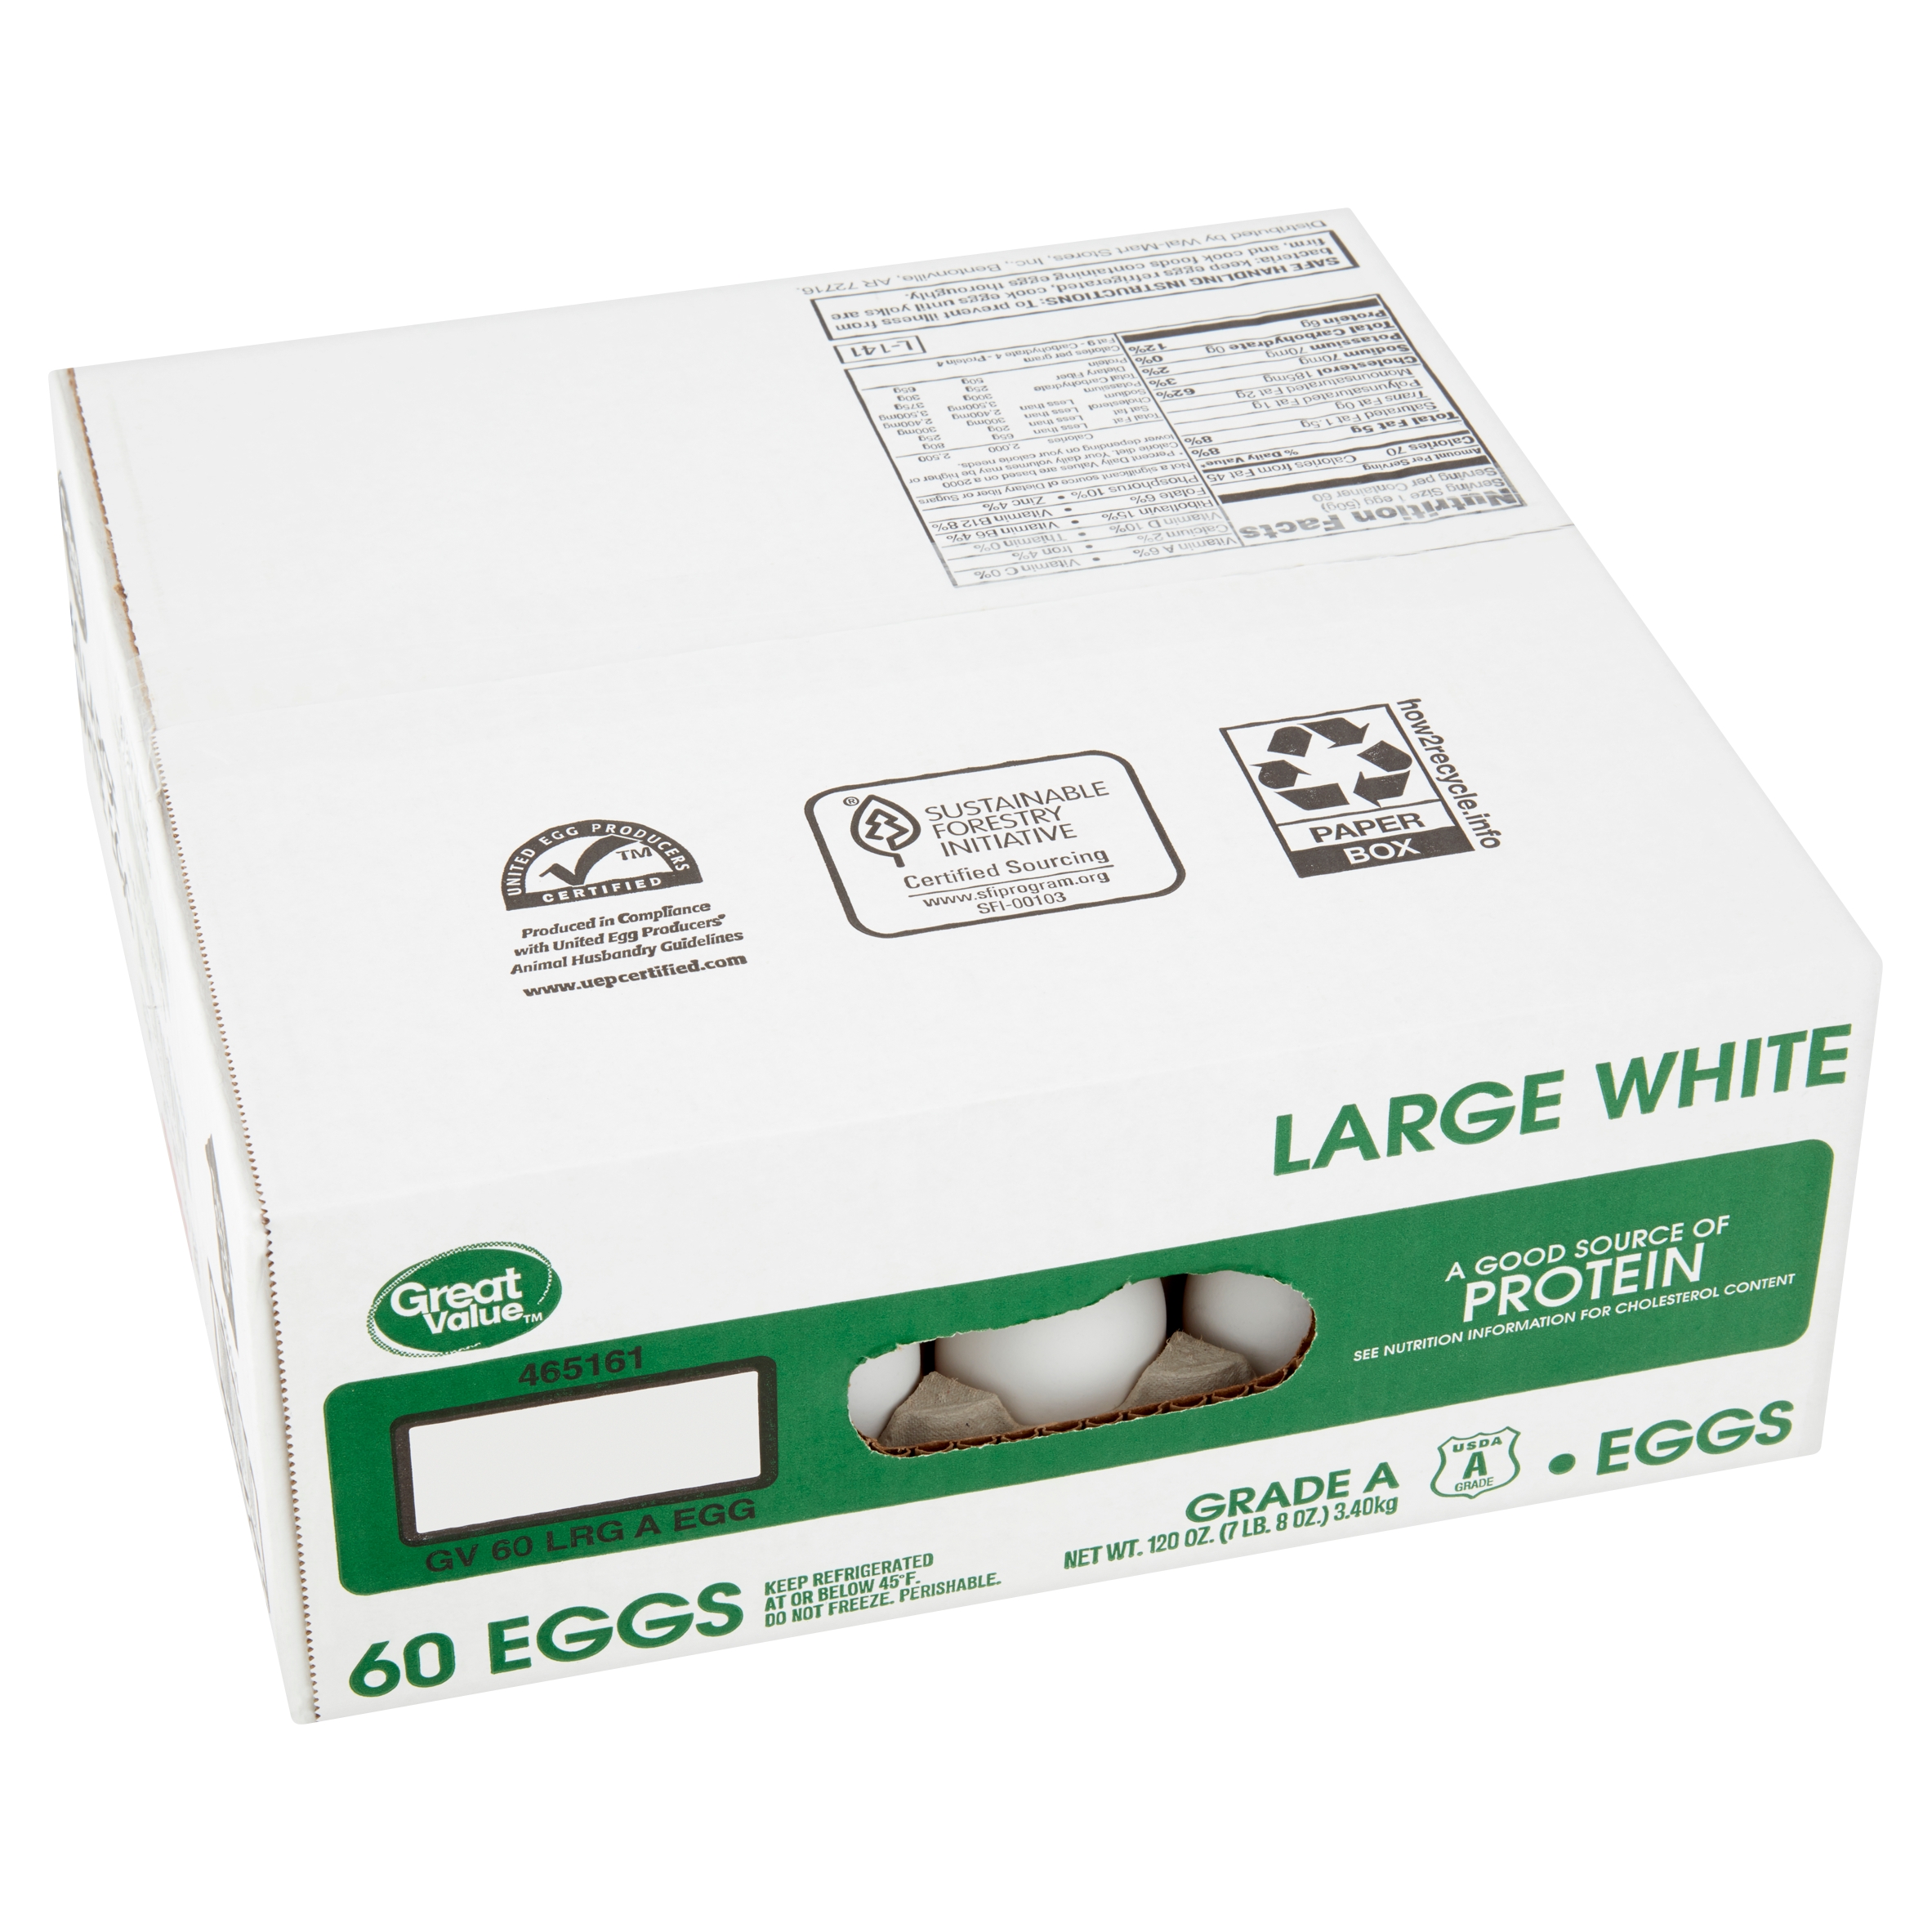 Great Value Large White Eggs, 60 Count, 120 Oz